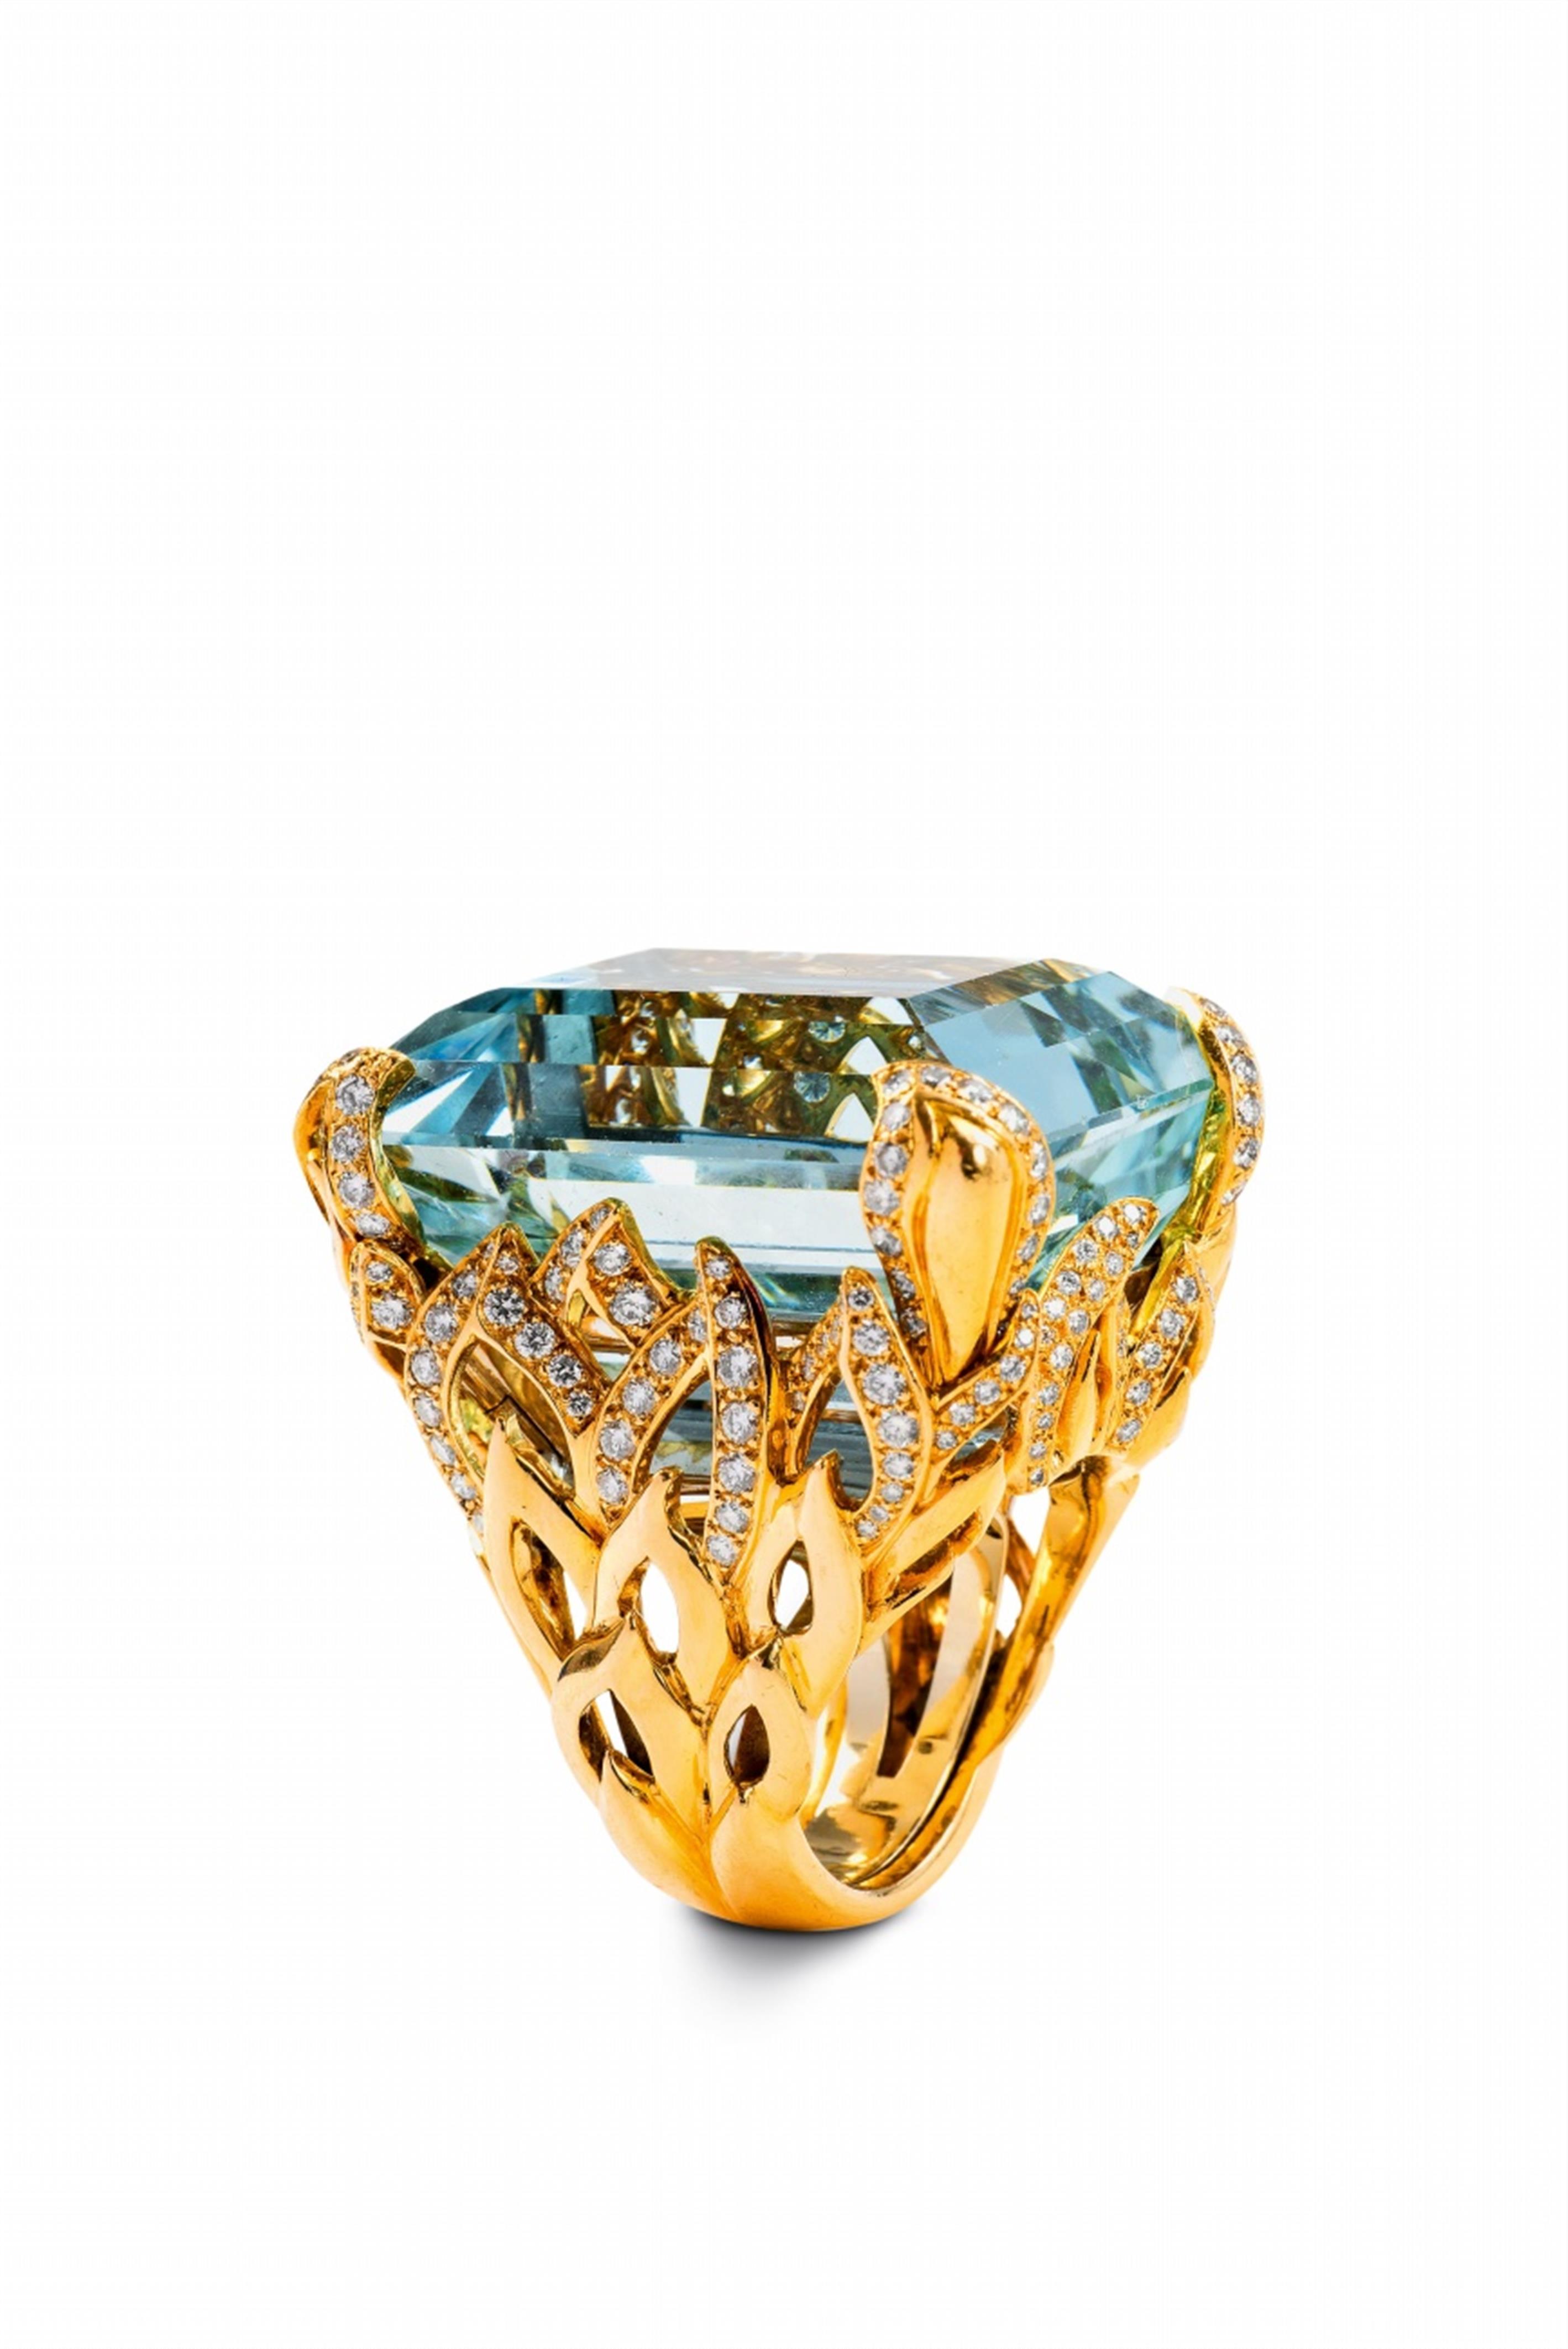 A Dior cocktail ring with a large aquamarine - image-1